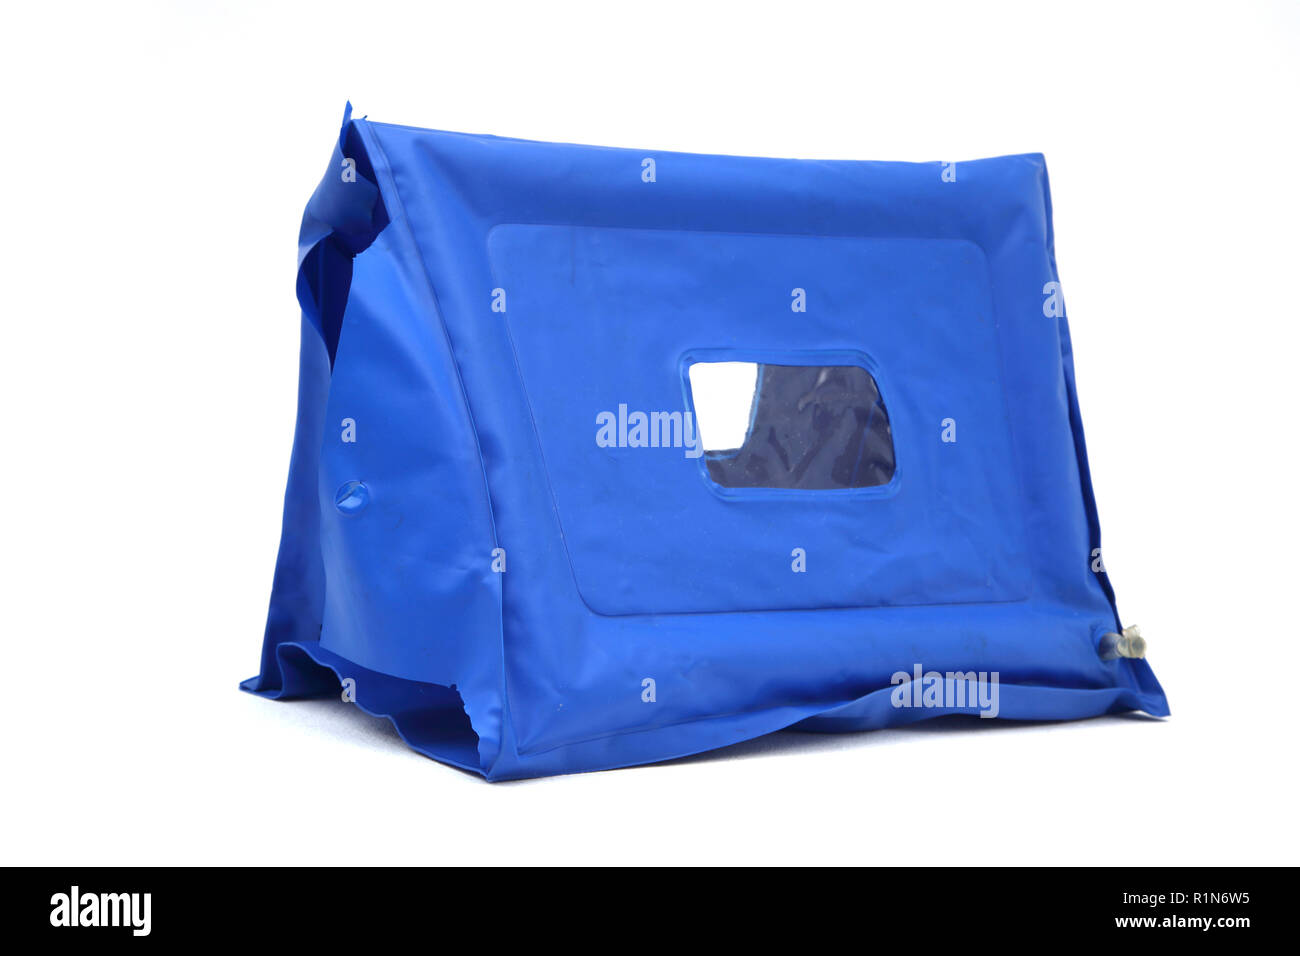 Vintage 1970's Sindy's Foldaway Inflatable Tent Stock Photo